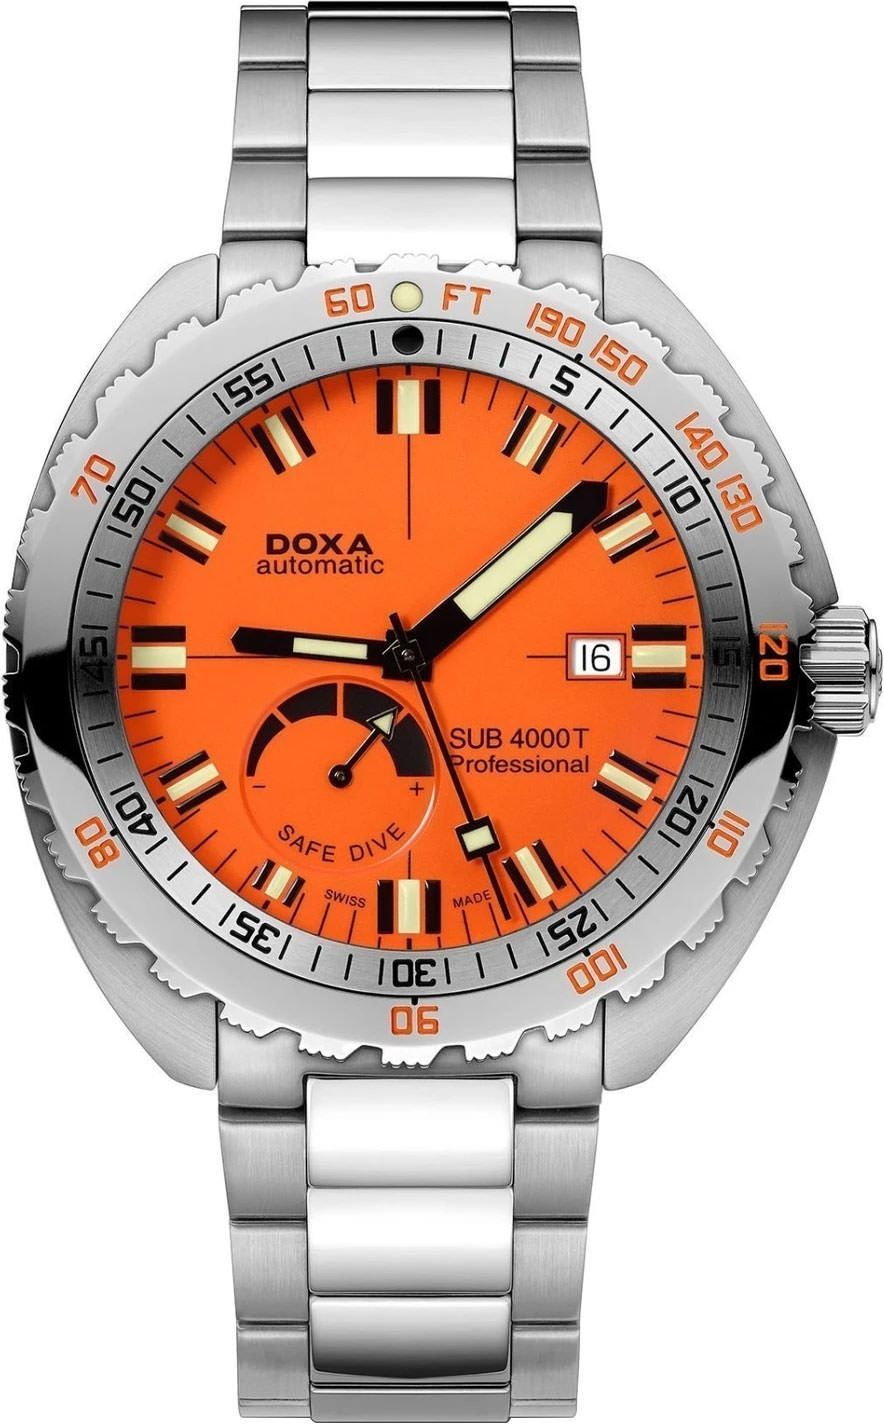 Doxa SUB 4000T Professional Orange Dial 47.5 mm Automatic Watch For Men - 1